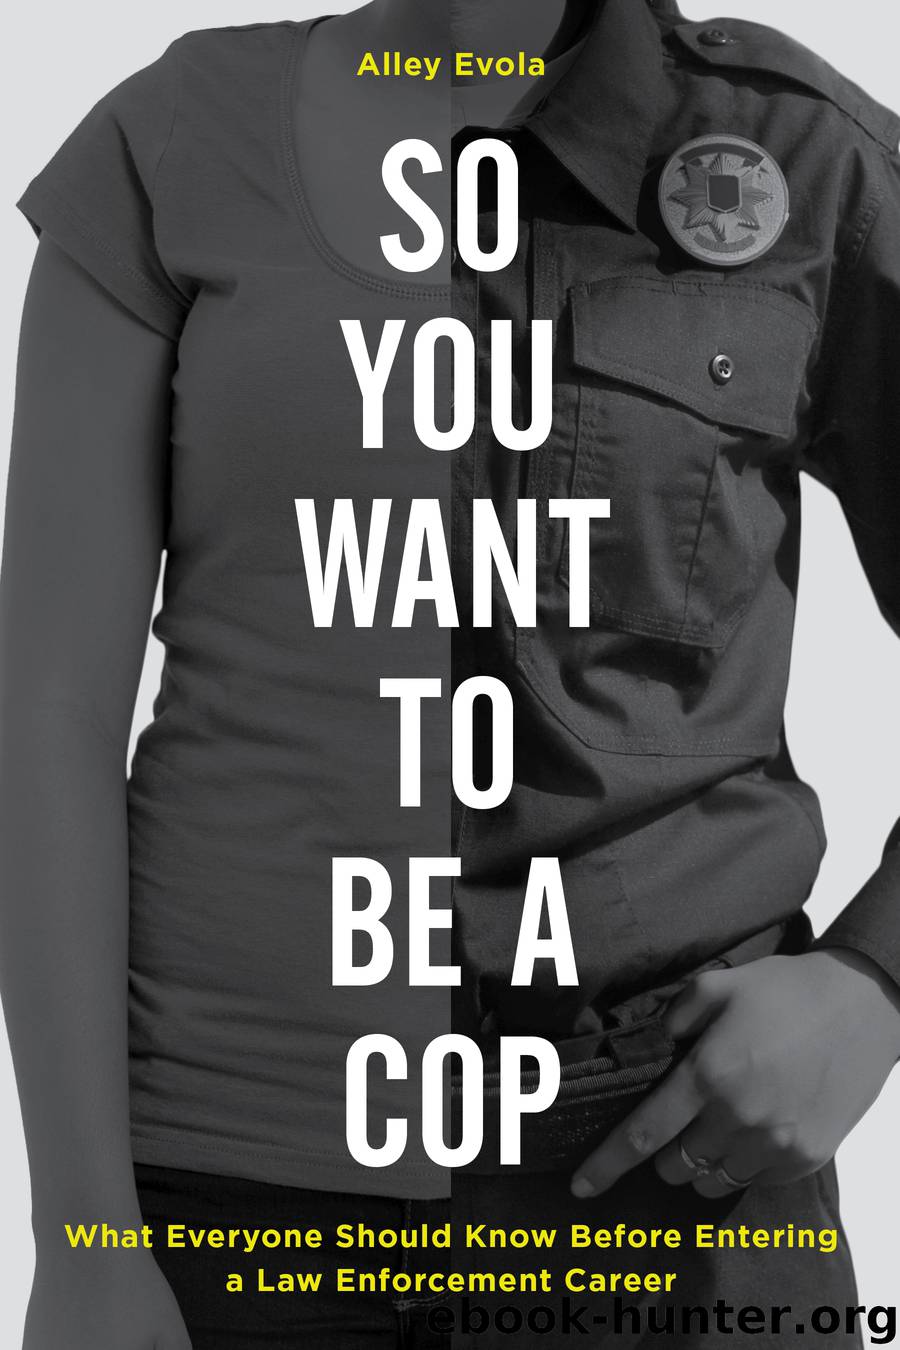 So You Want to Be a Cop by Alley Evola